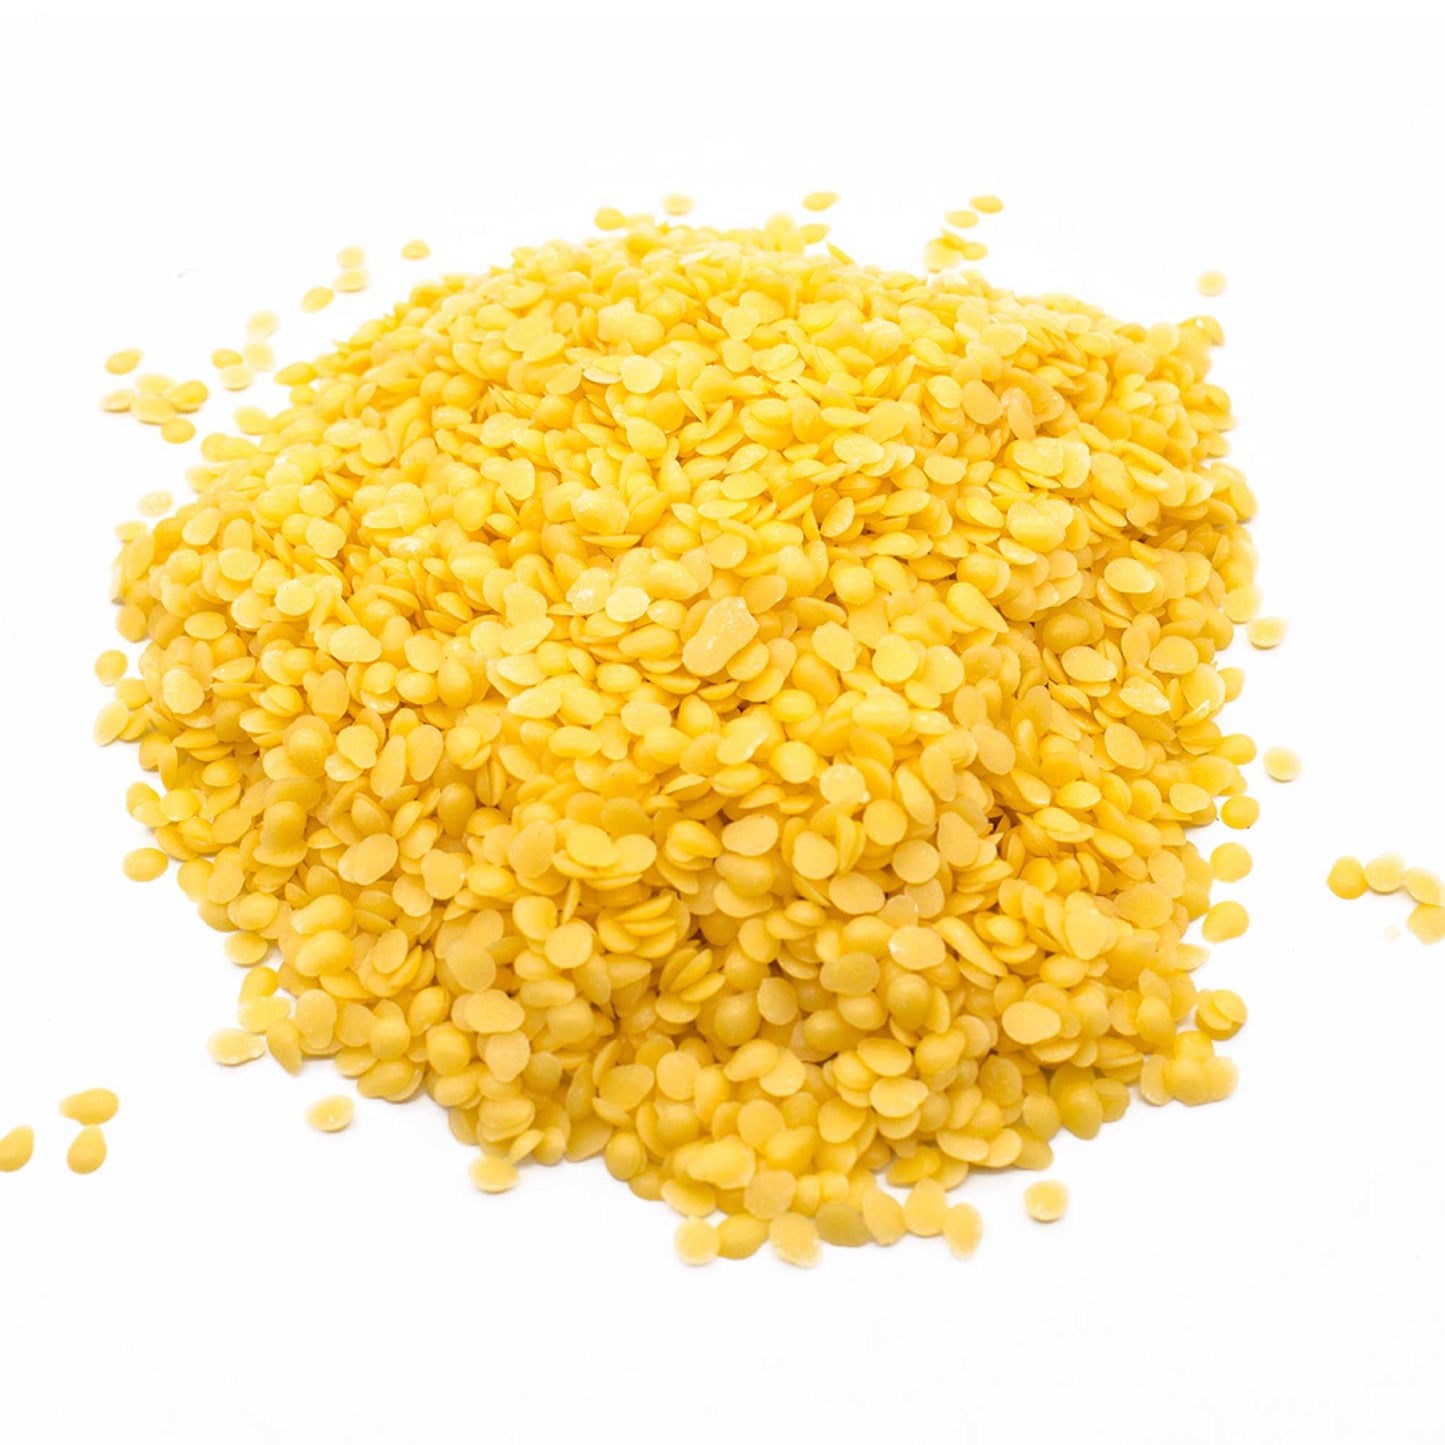 Organic Beeswax Pellets Bucket Pharmaceutical Cosmetic Candle Yellow Bees Wax